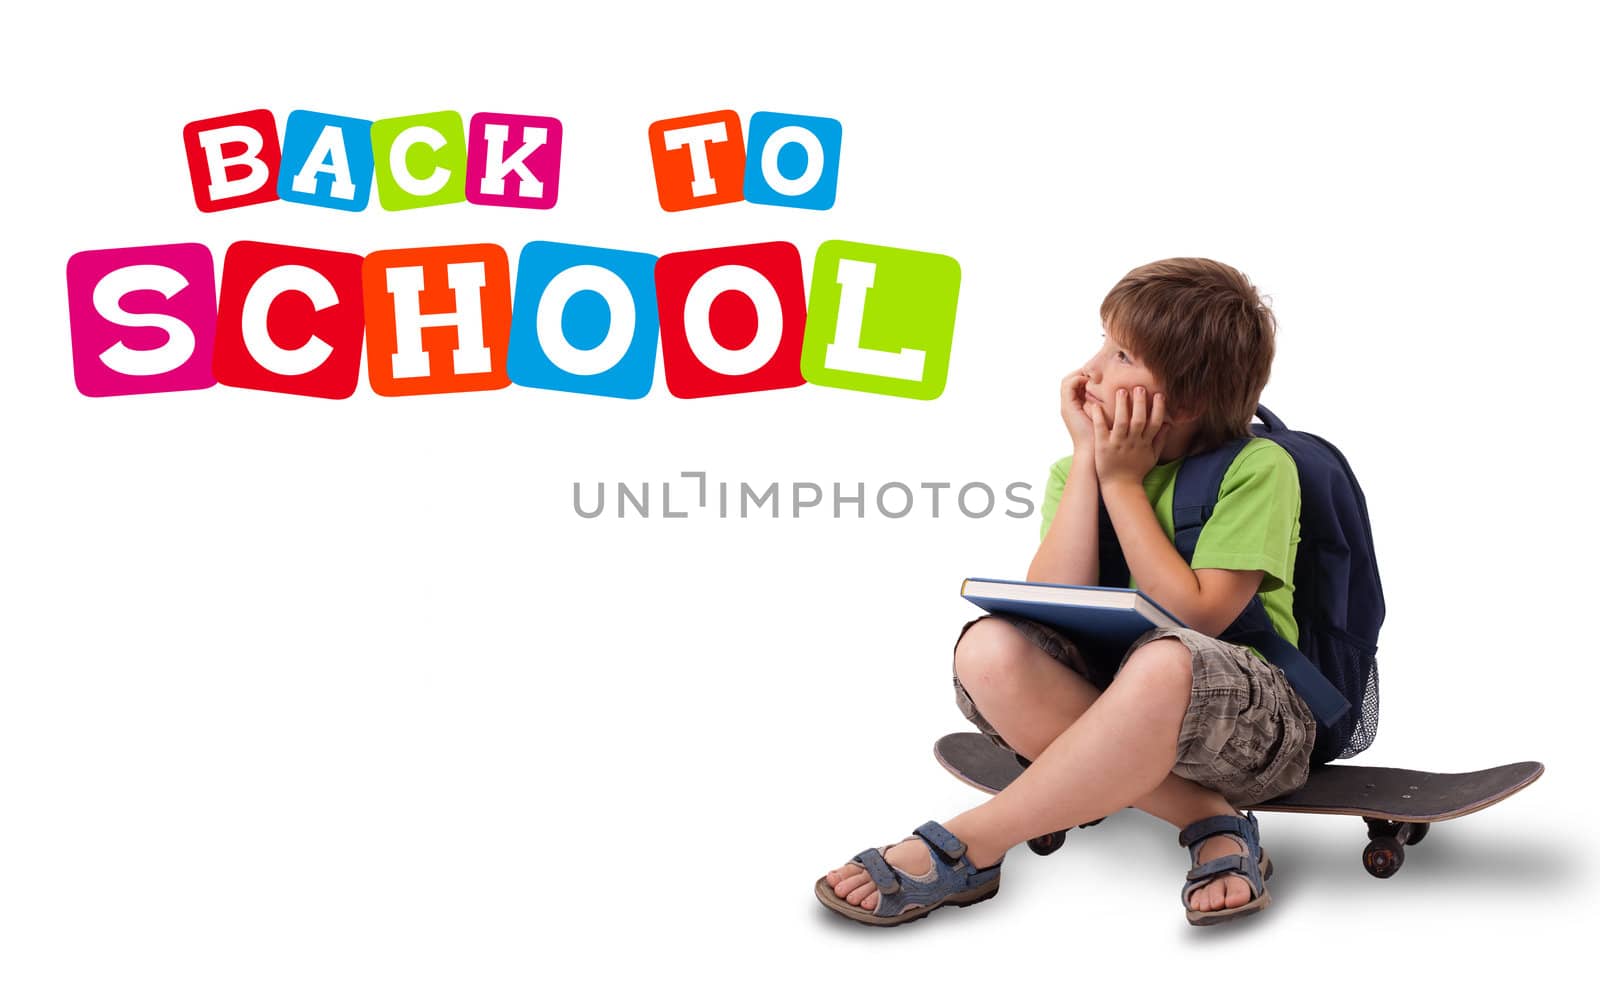 Kid sitting on skateboard with back to school theme isolated on white